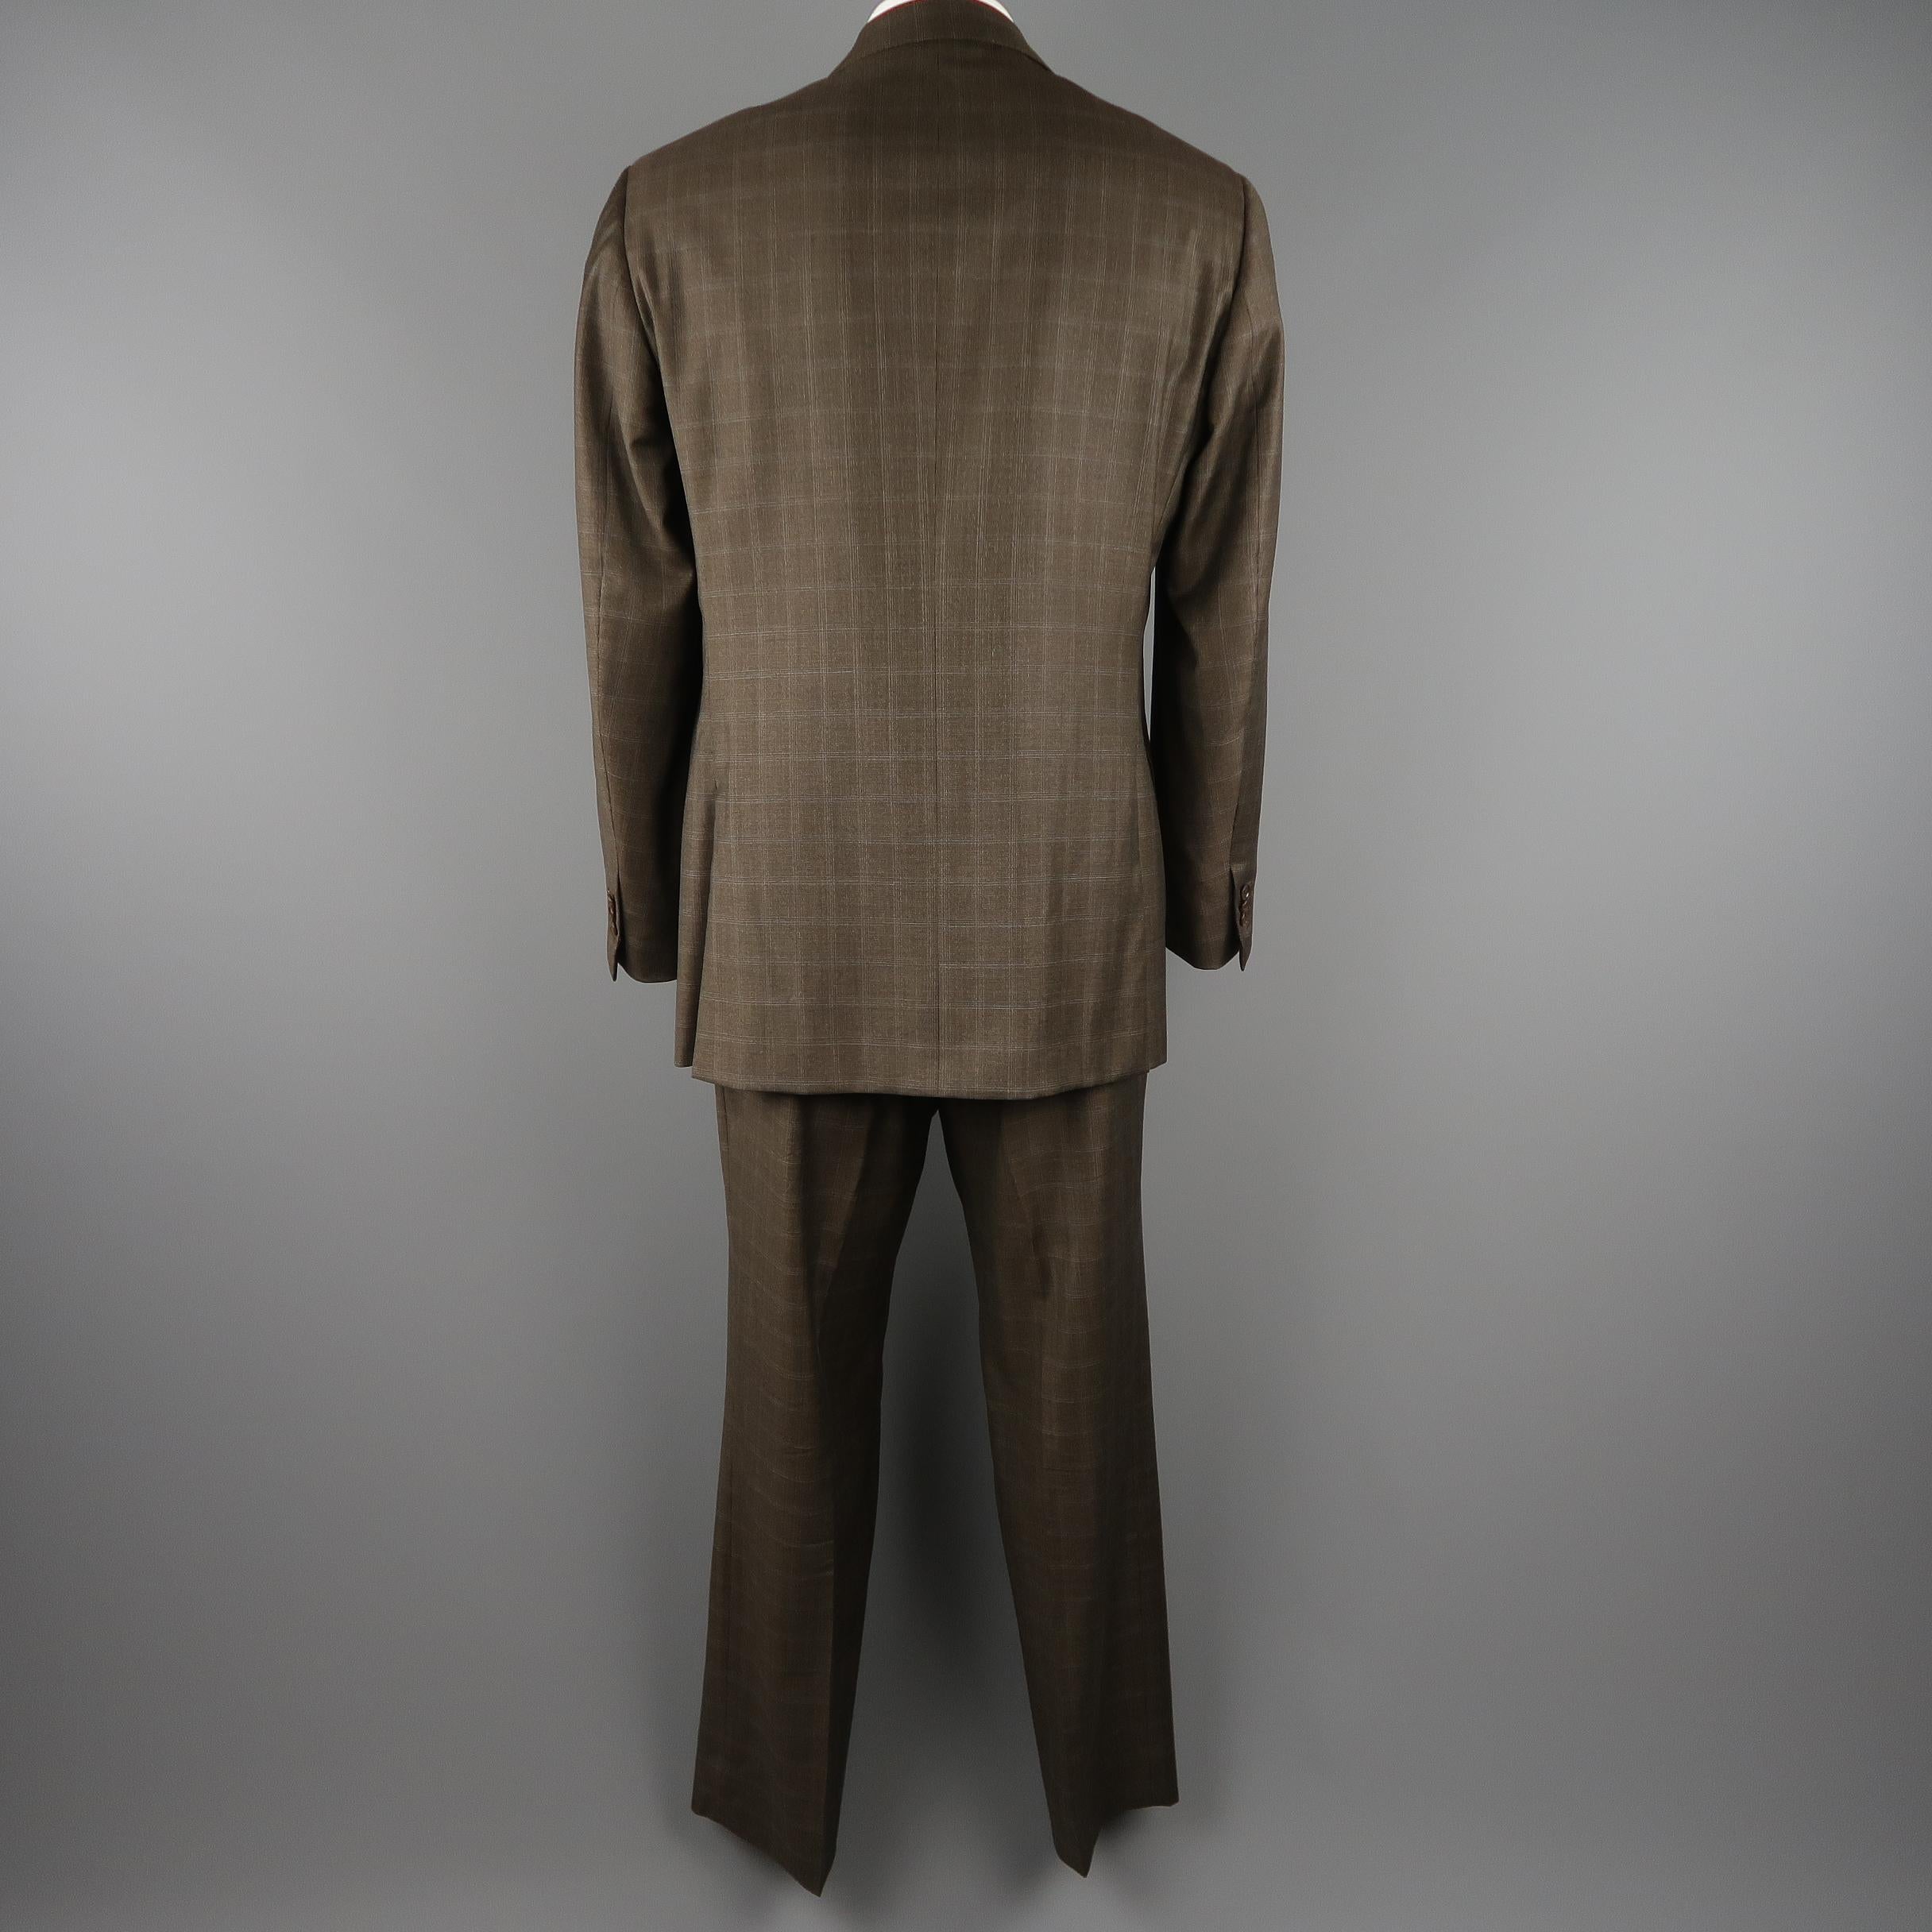 Black ISAIA 48 Long Brown Window Pane Wool Single Breasted 2 Button Suit